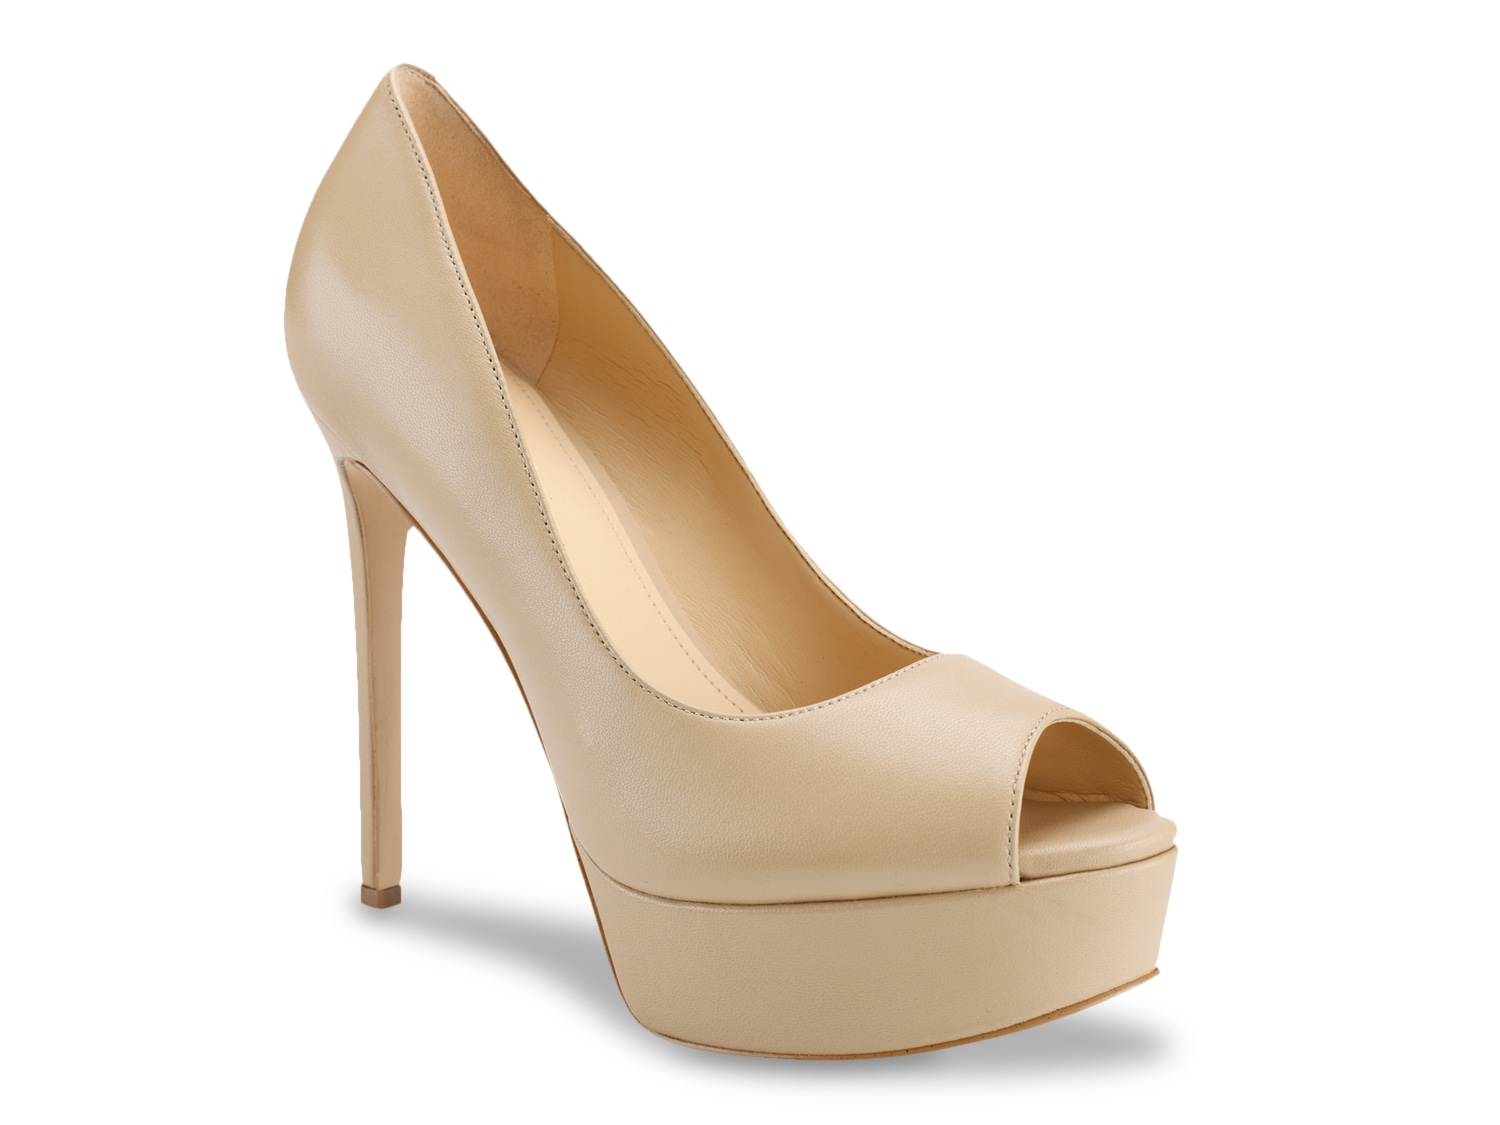 Guess Cacei Platform Pump - Shipping DSW